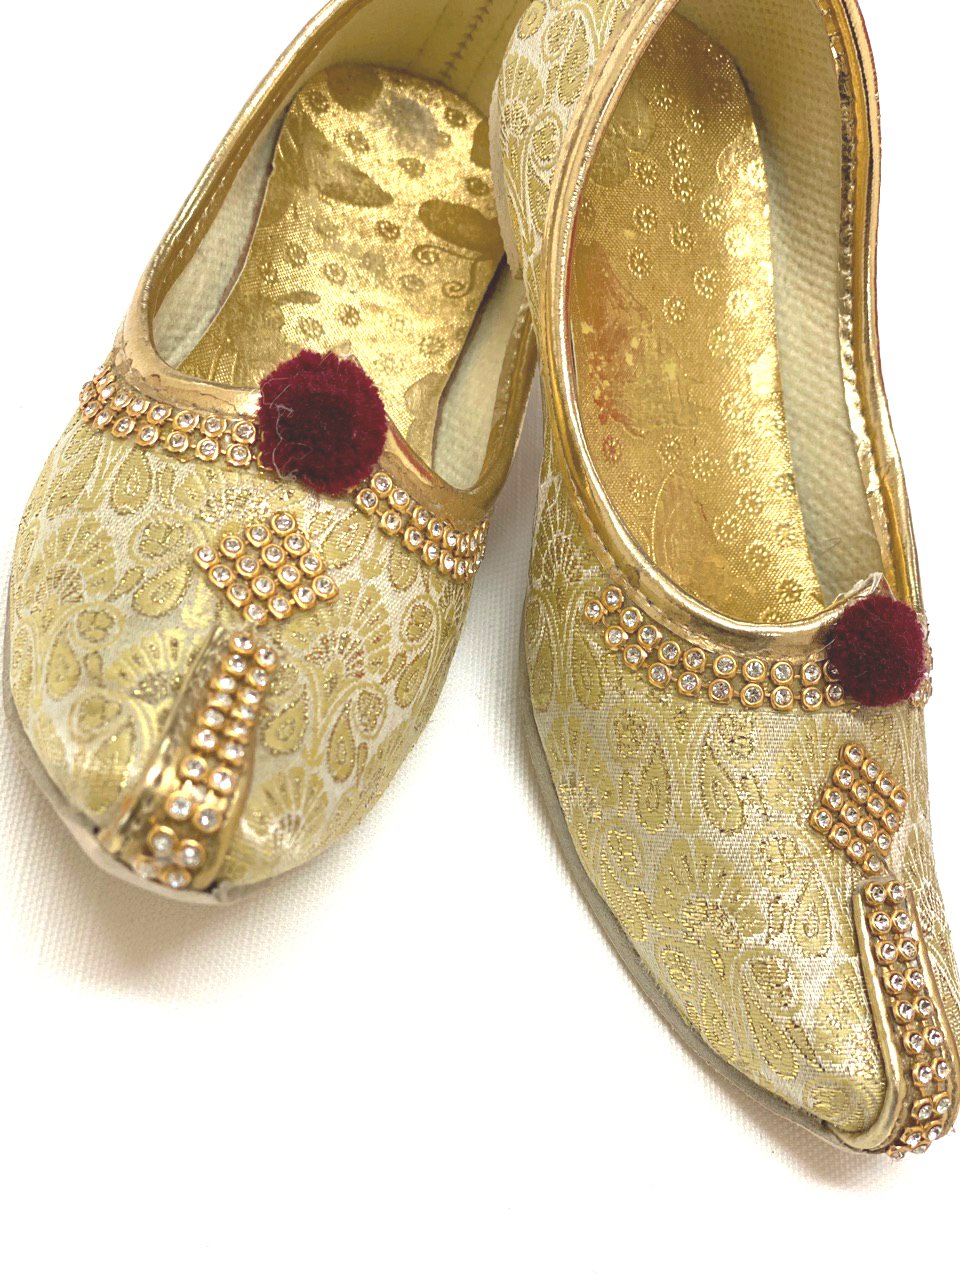 Kids Golden Punjabi Shoes with Sequince